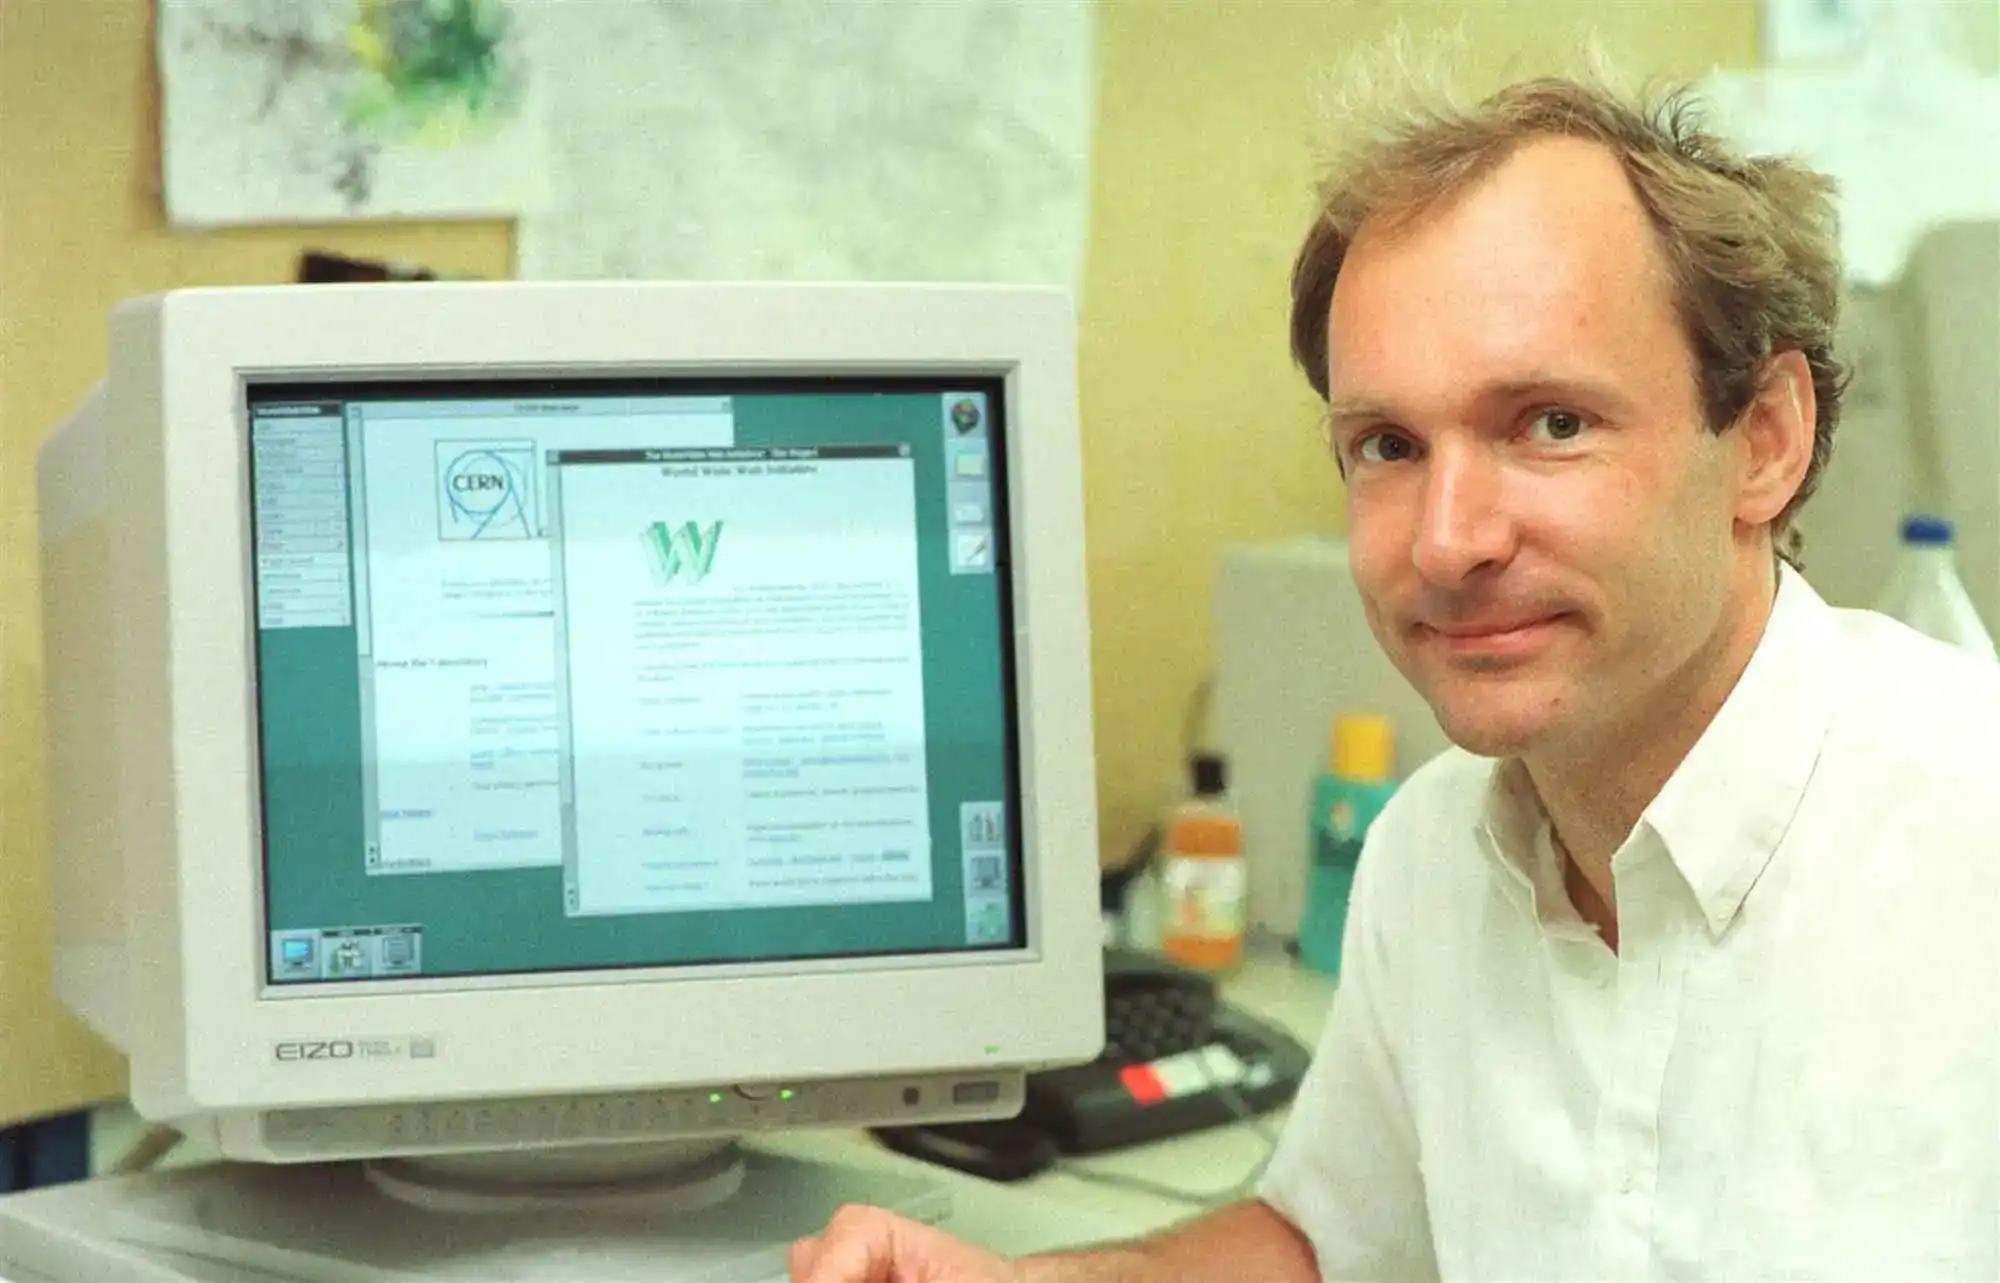 Photo of Tim Berners-Lee, the British computer scientist widely credited as having invented the World Wide Web.